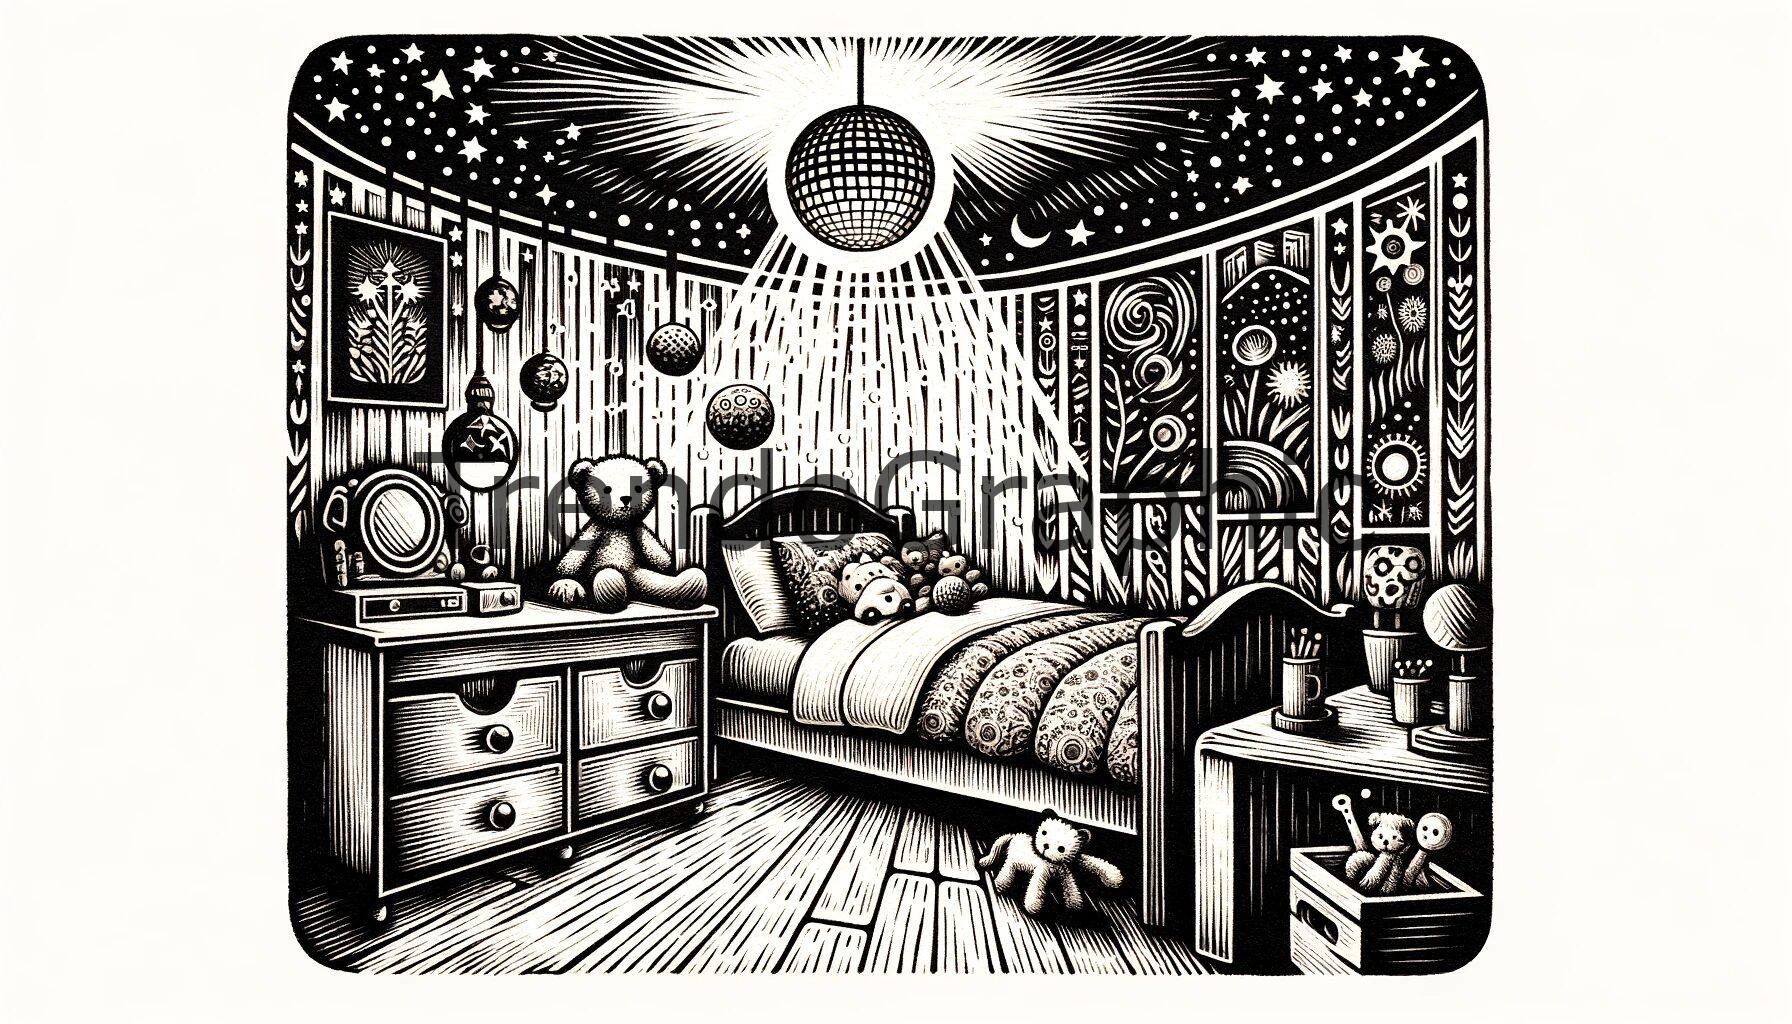 Enchanted Dreamscape: A Child’s Bedroom with Mini Disco Ball